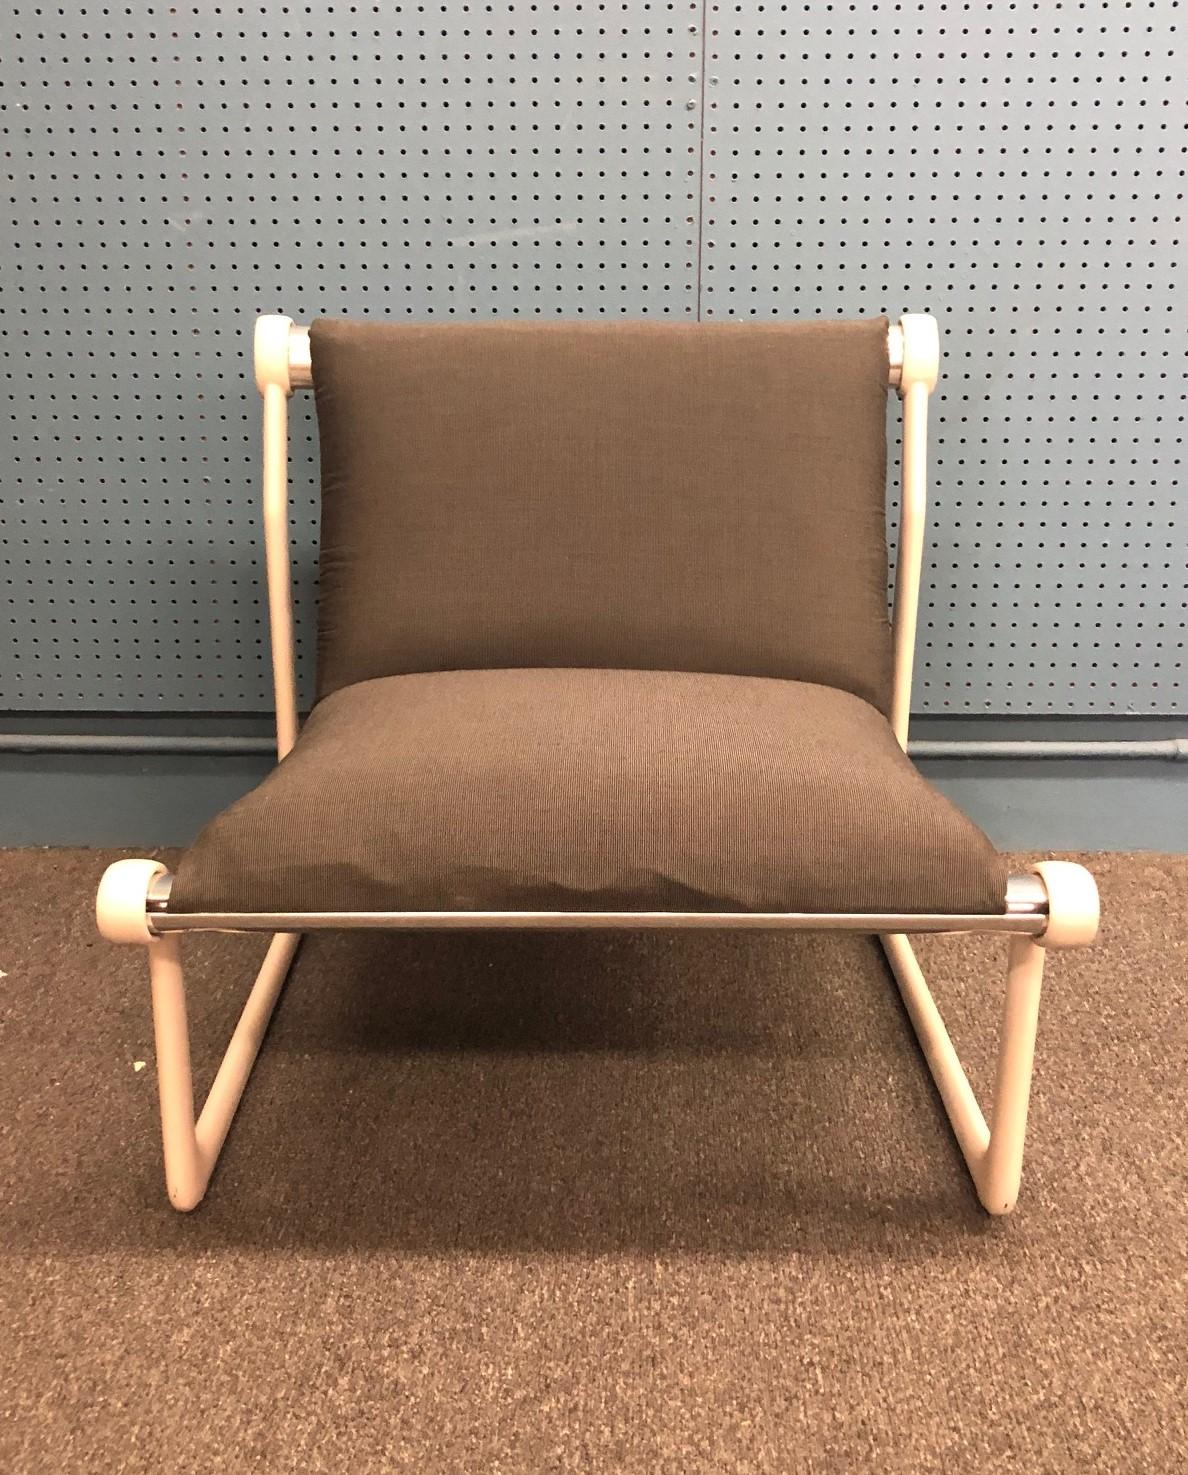 20th Century Sling Lounge Chair by Hannah & Morrison for Knoll International